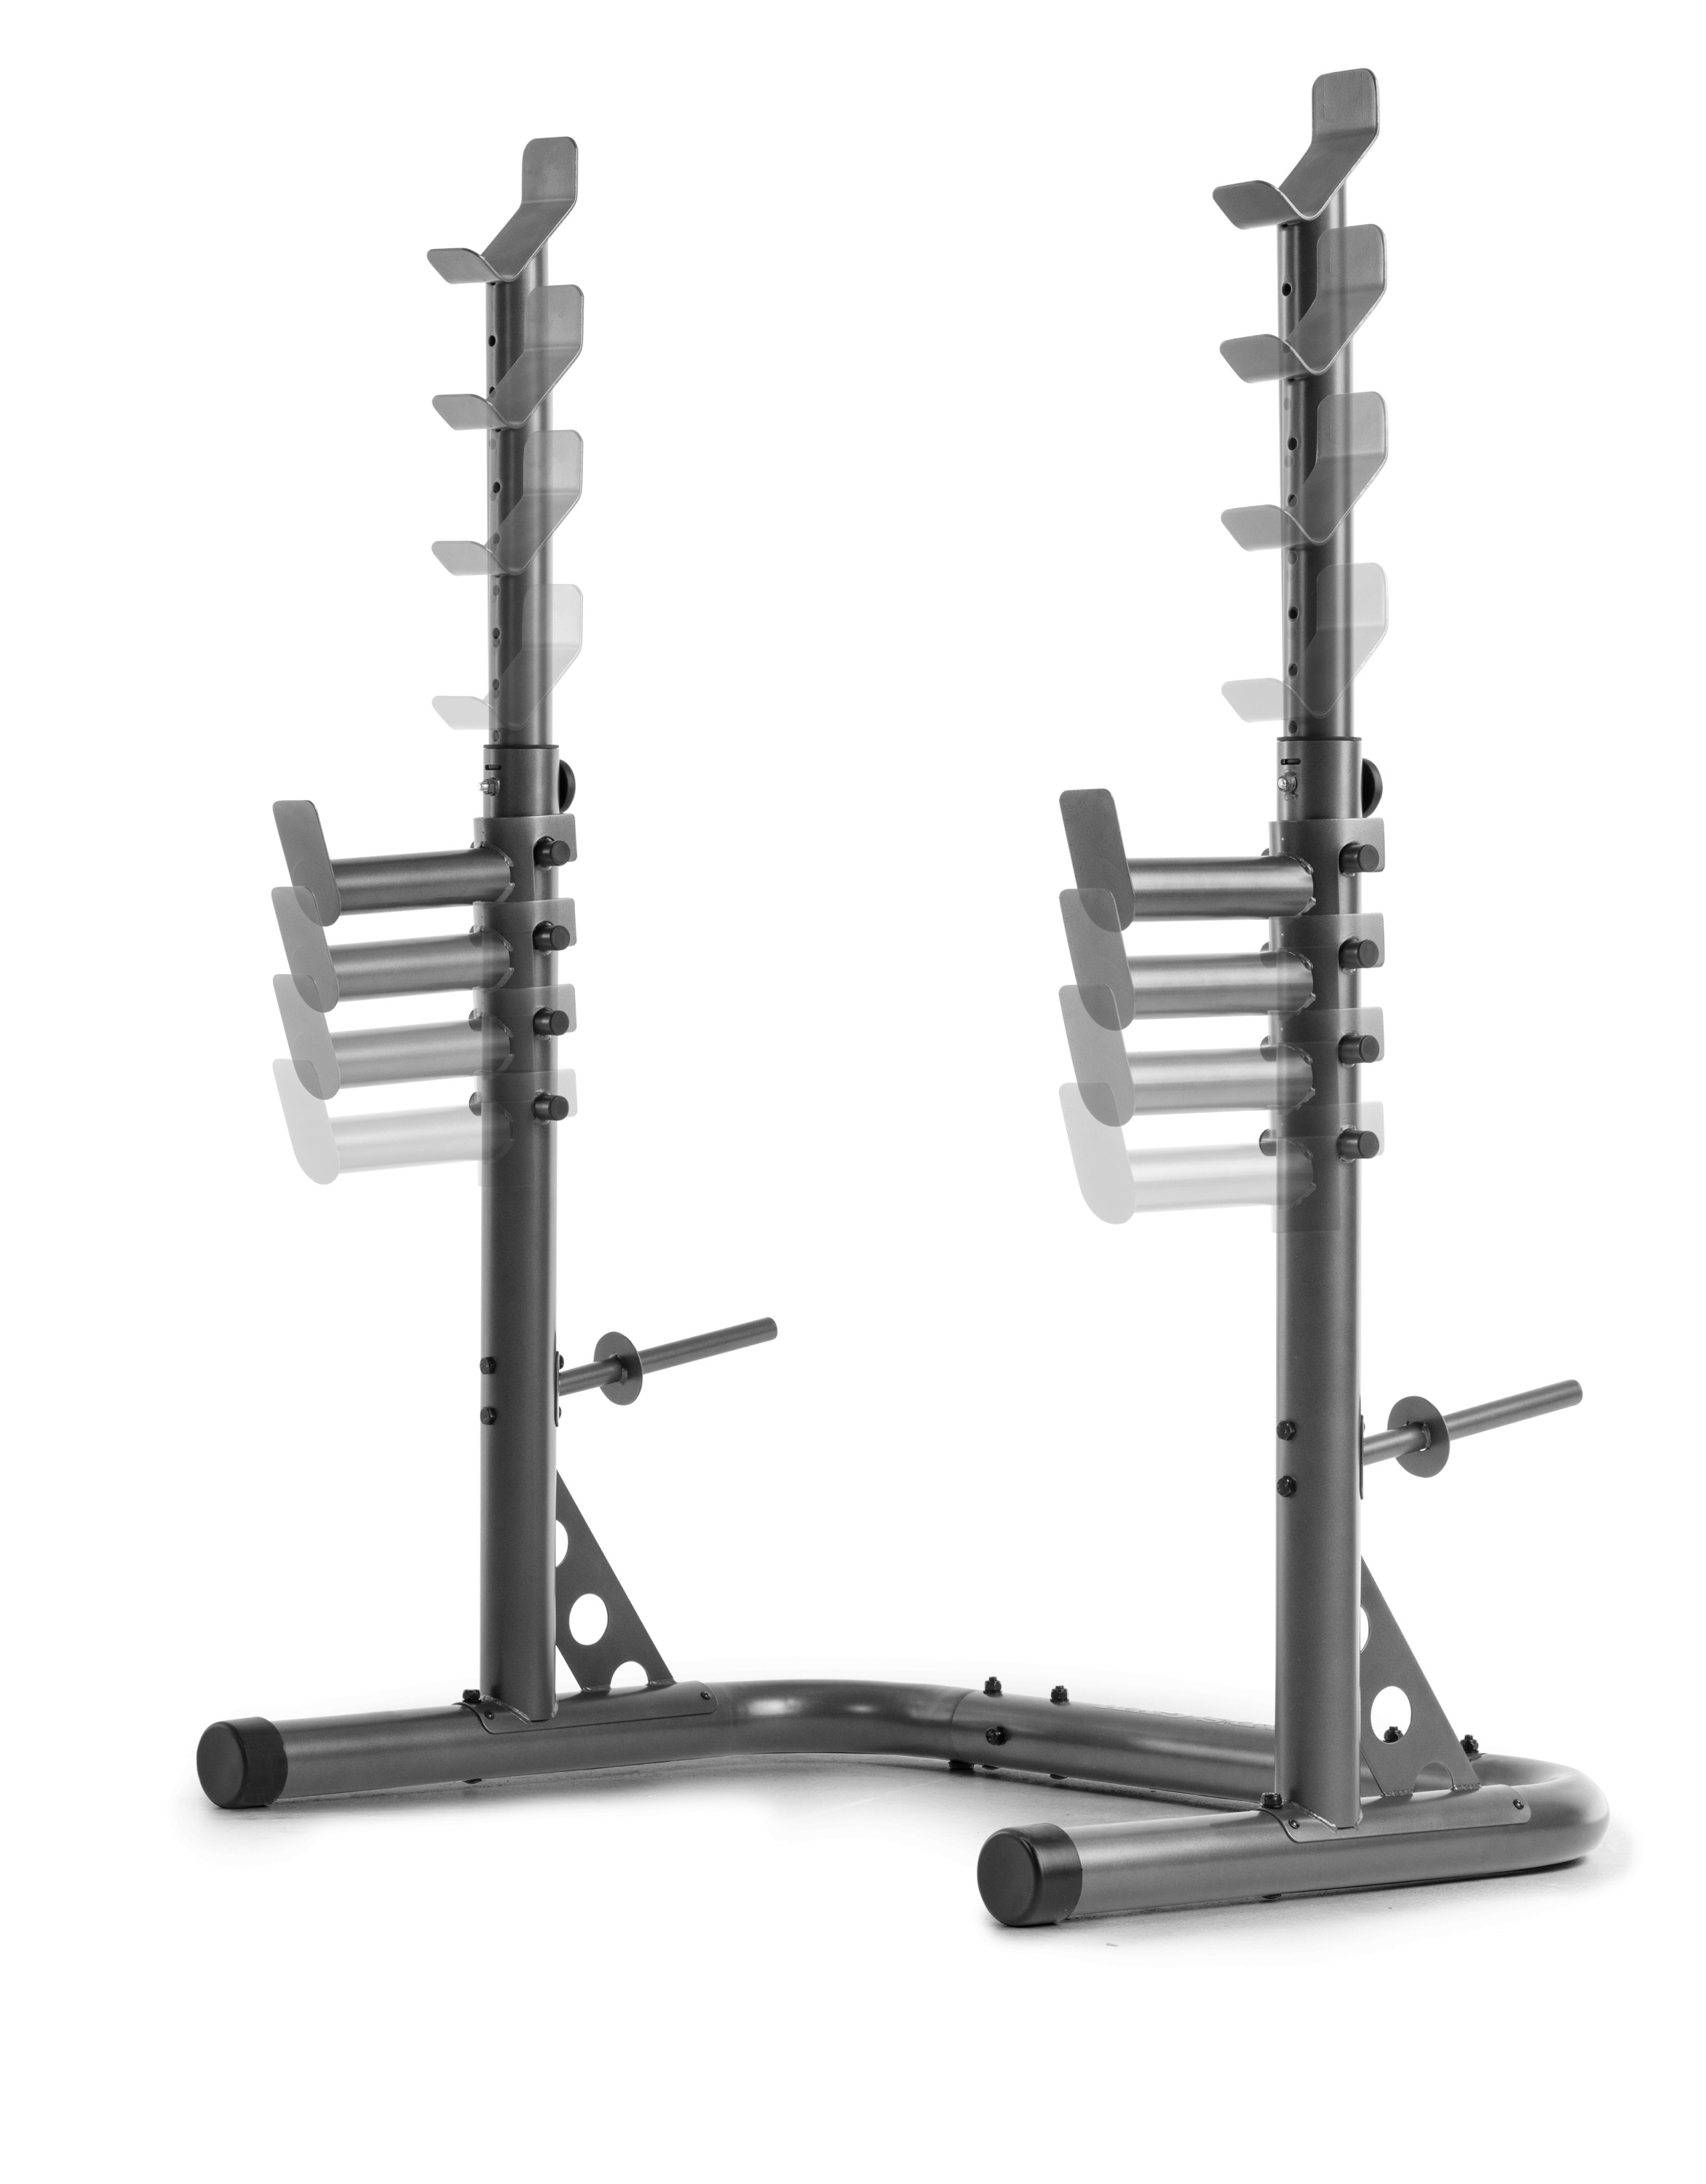 Weider XRS 20 Adjustable Bench with Olympic Squat Rack and Preacher Pad, 610 lb. Weight Limit - image 10 of 13